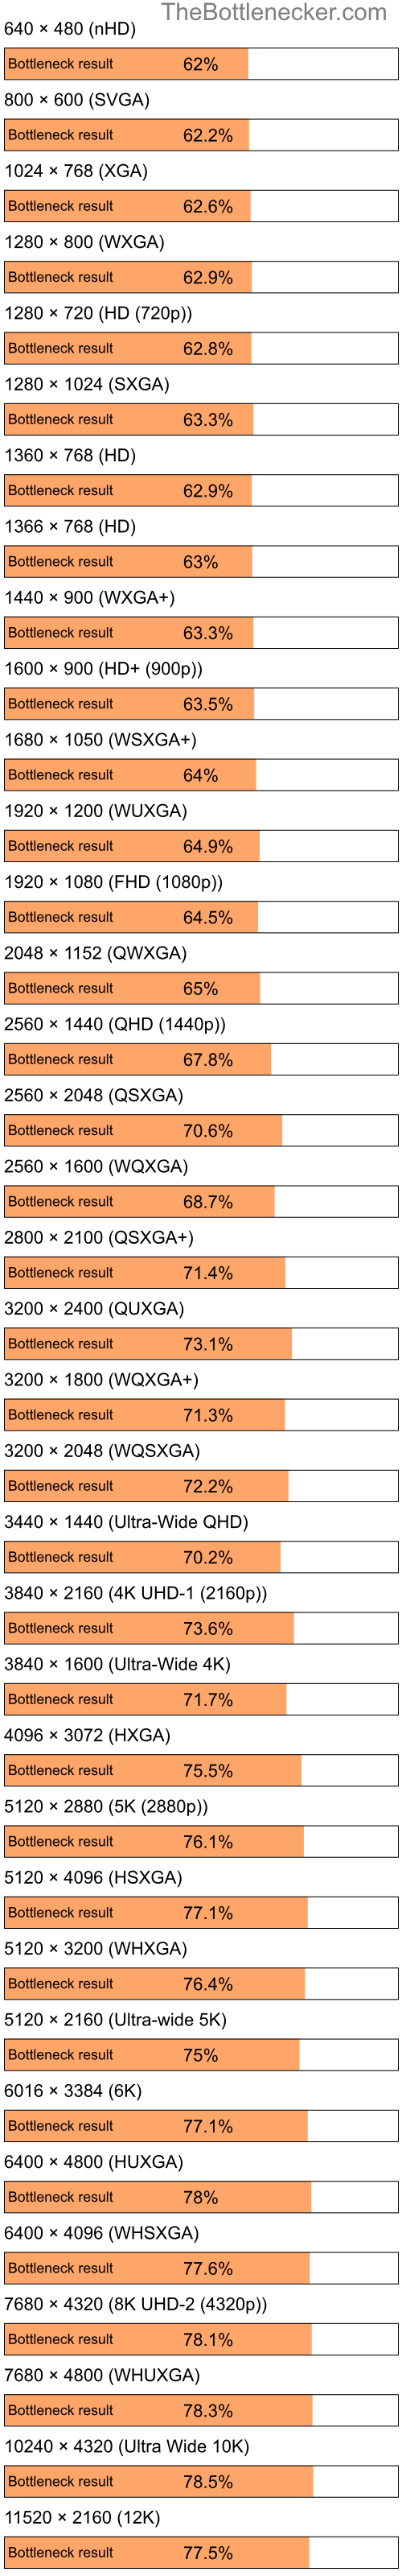 Bottleneck results by resolution for Intel Pentium 4 and AMD Radeon X800 XL in Processor Intense Tasks